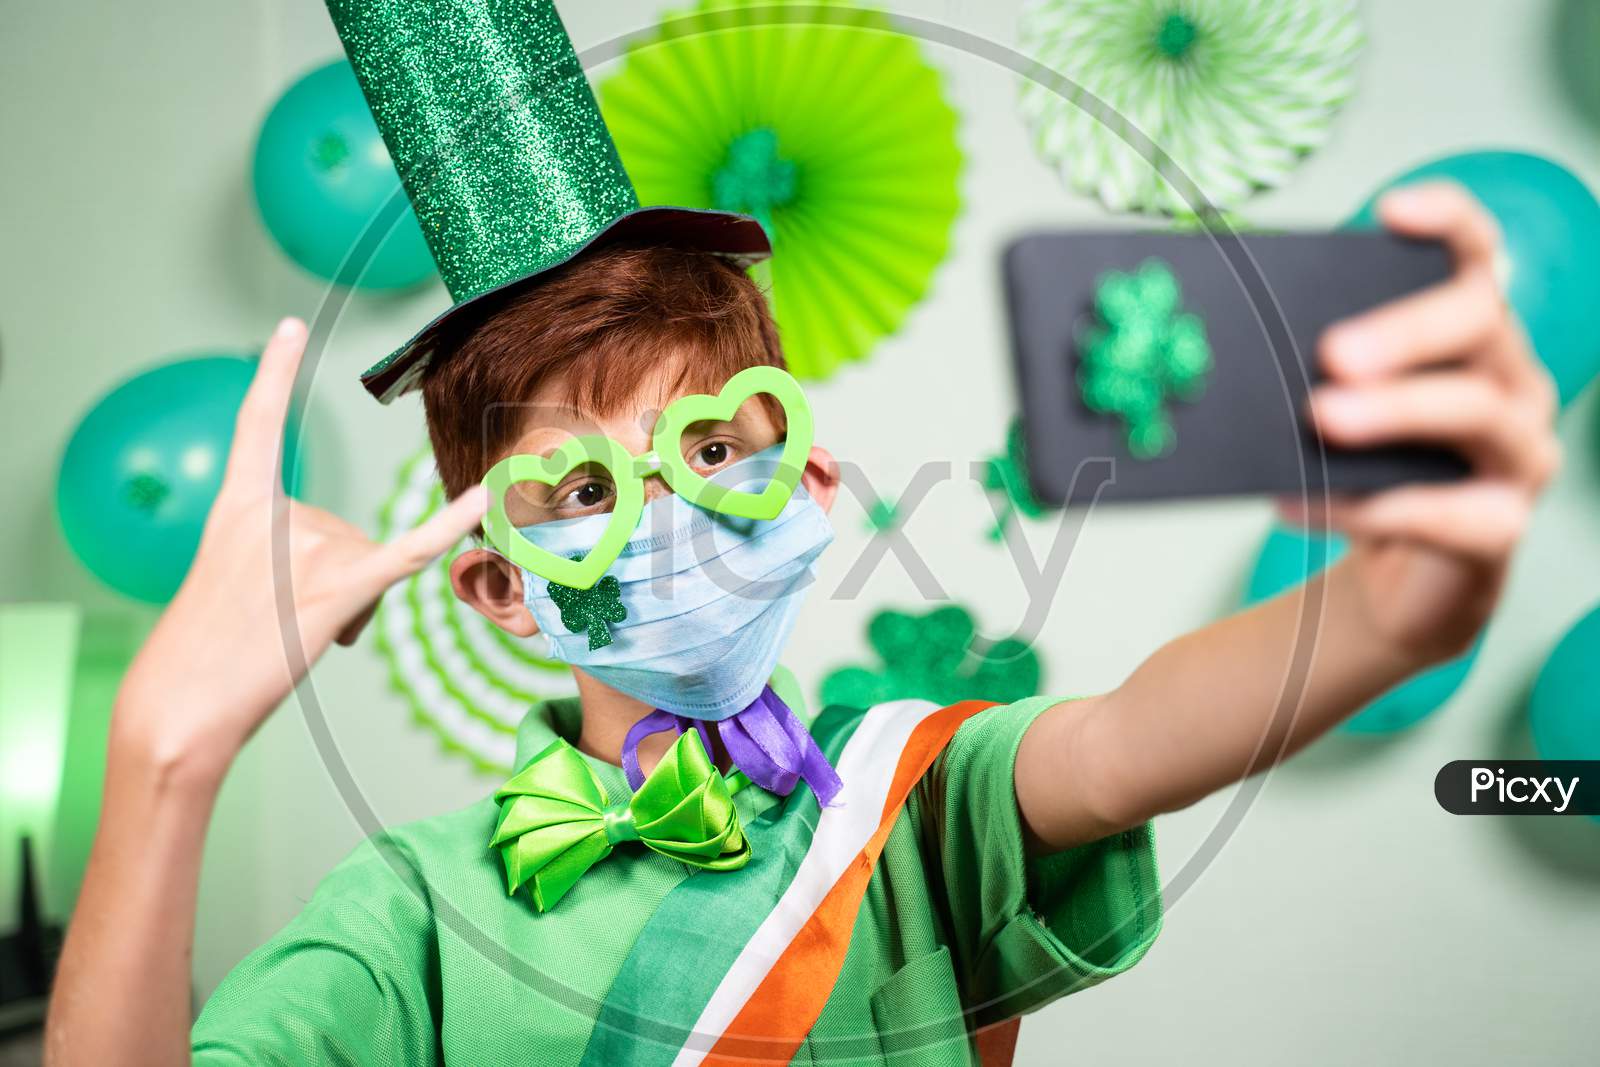 Young Kid With Medical Face Mask Taking Selfie During Saint Patricks Day Celebration At Home On Decorated Background During Coronavirus Covid-19 Pandemic At Home.